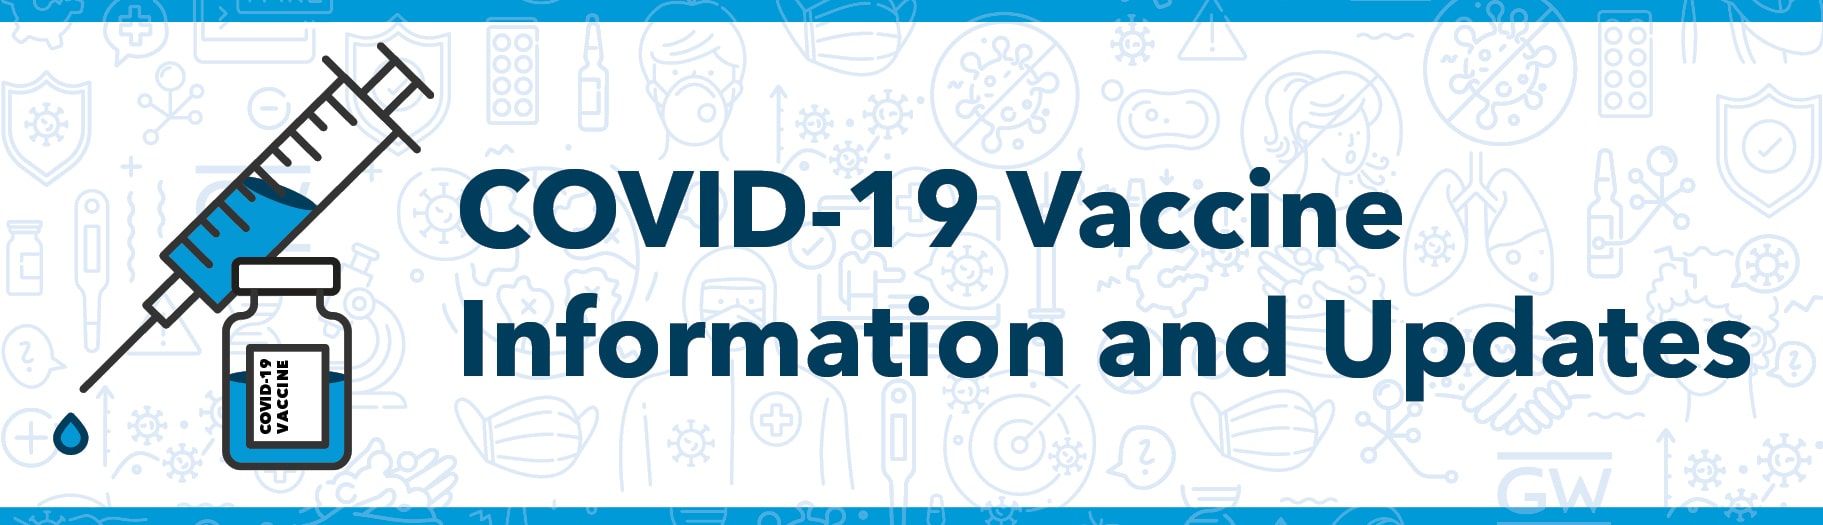 COVID-19 Vaccine Information and Updates